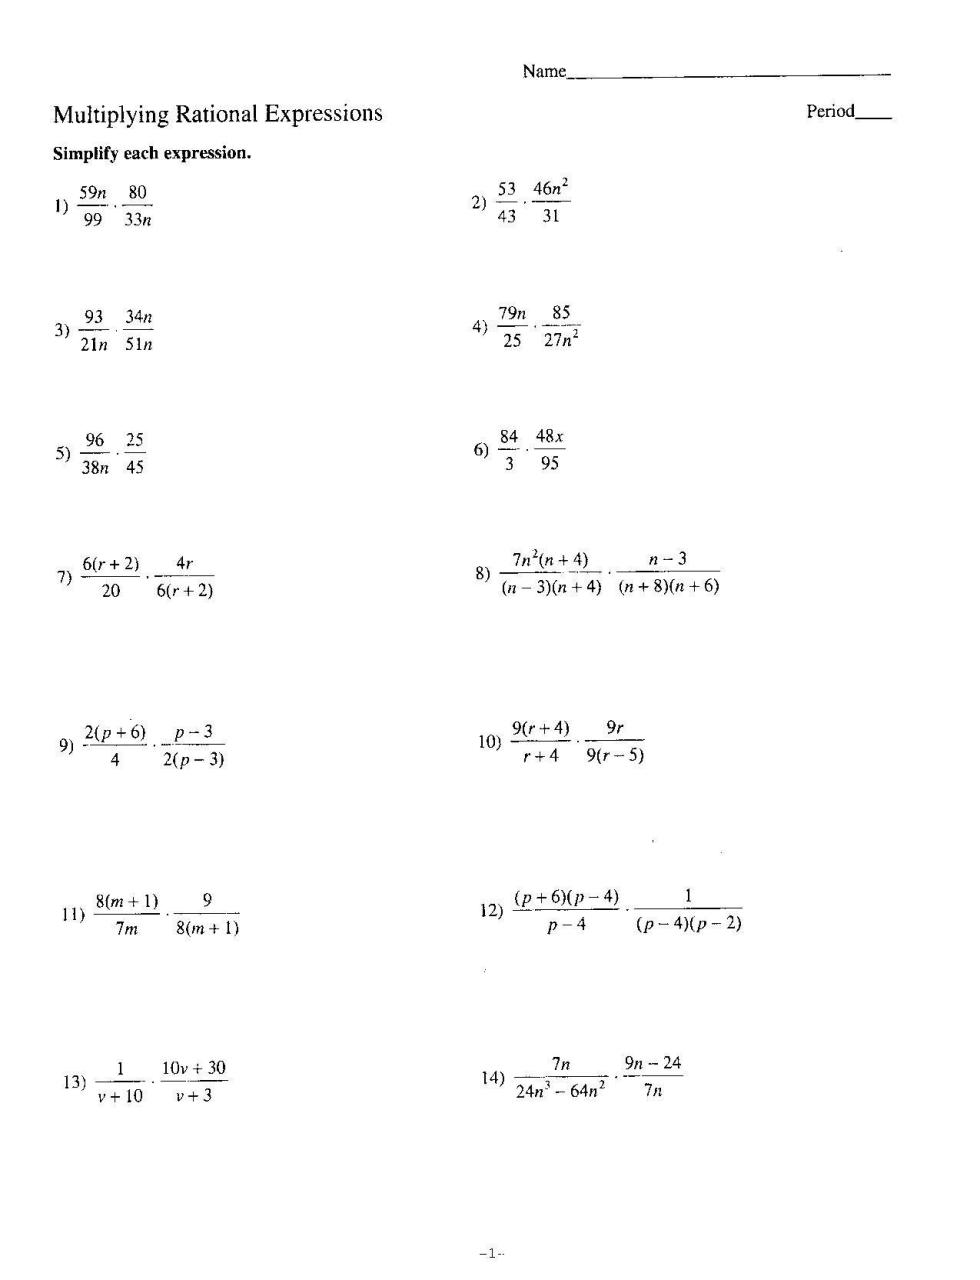 Two Step Equations Worksheet Math Aids